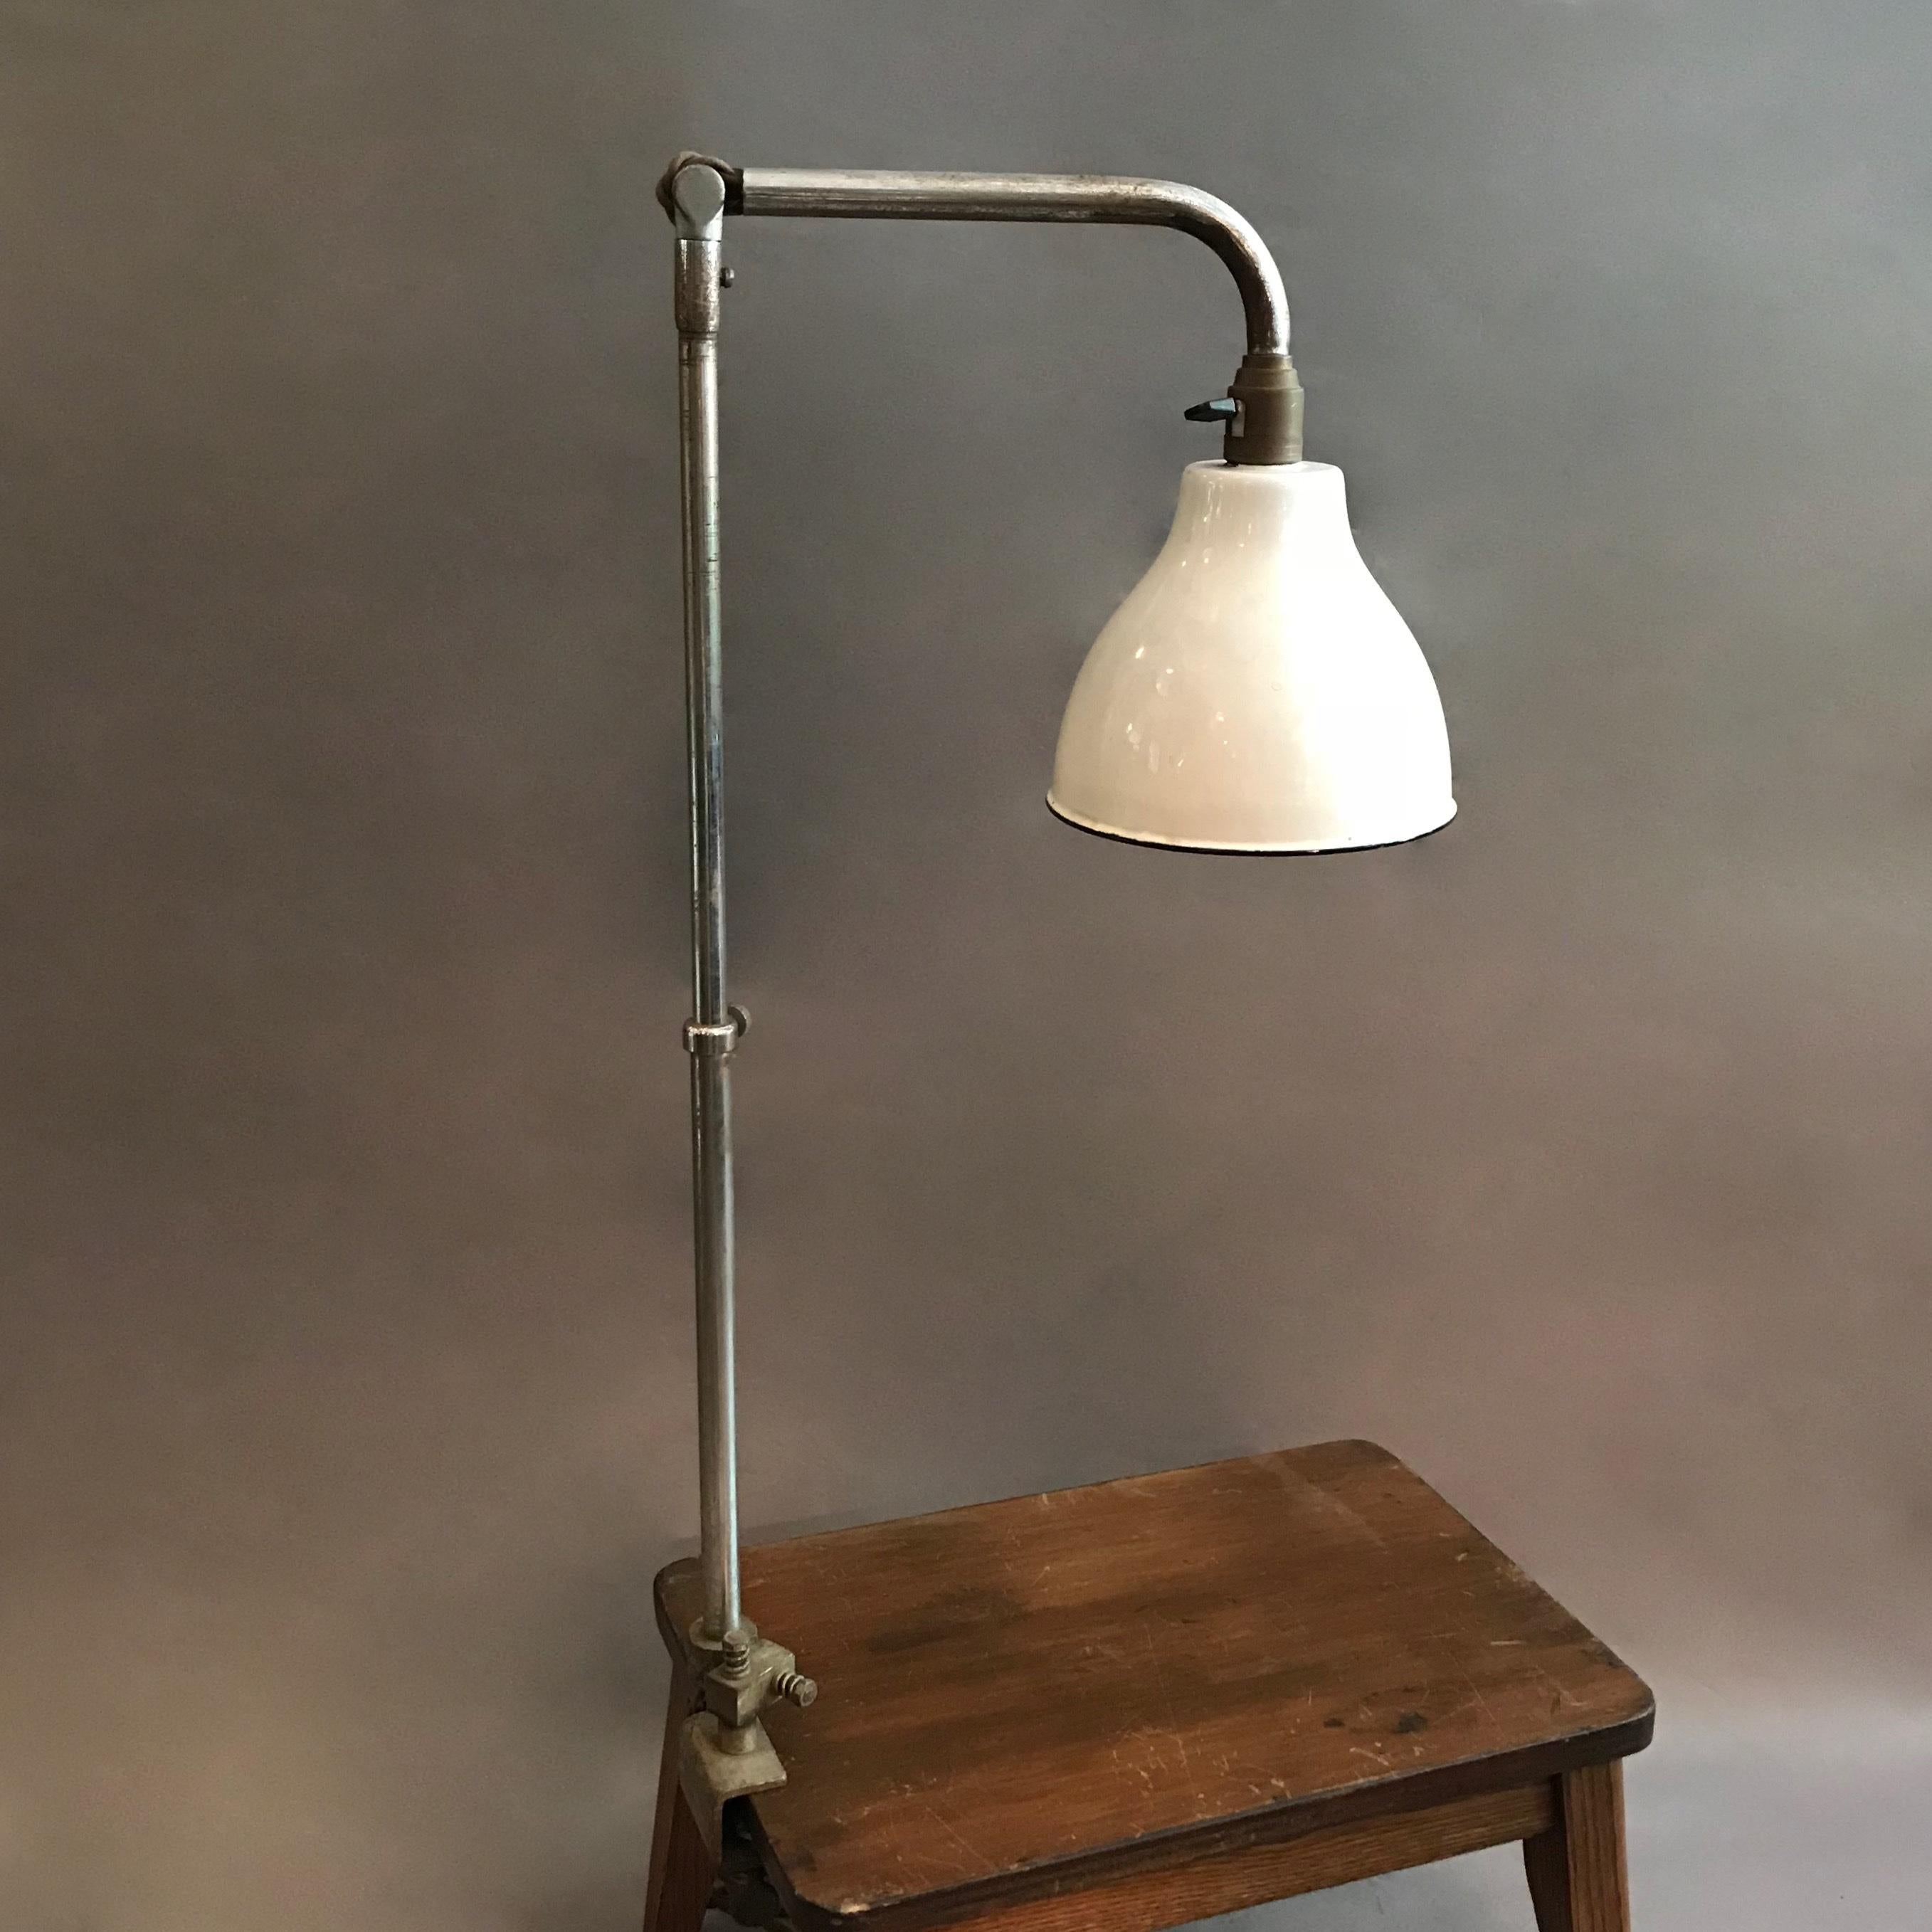 French, industrial task lamp by Alphonse Pinoit for Ki-E-Klair features a height adjustable, chrome-plated, telescopic stem with adjustable arm and white enamel shade. The lamp has a double screw clamp that attaches to a surface.